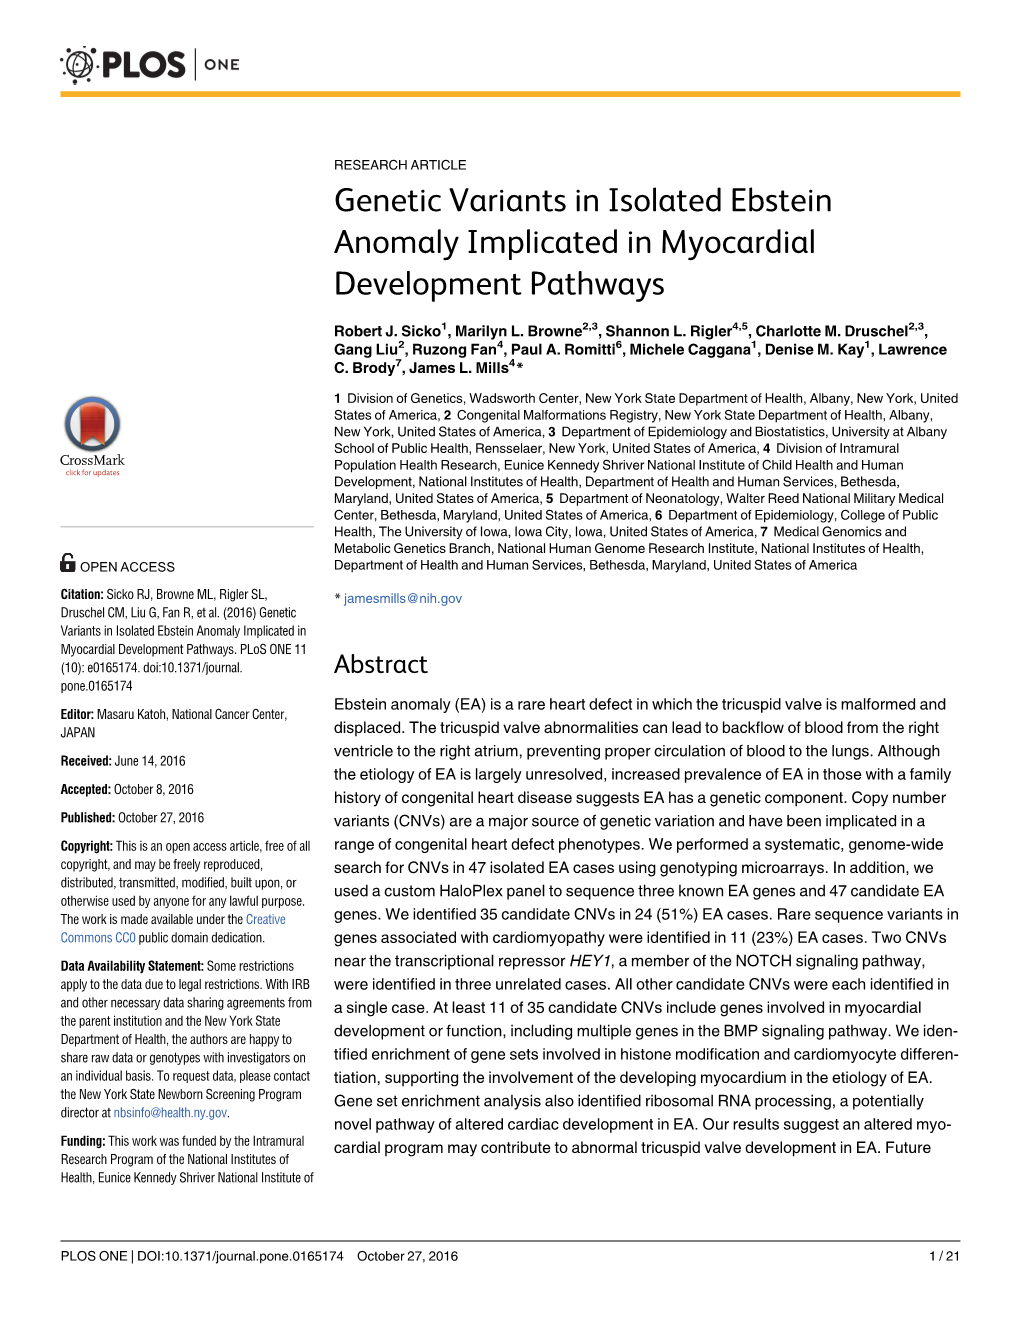 Genetic Variants in Isolated Ebstein Anomaly Implicated in Myocardial Development Pathways